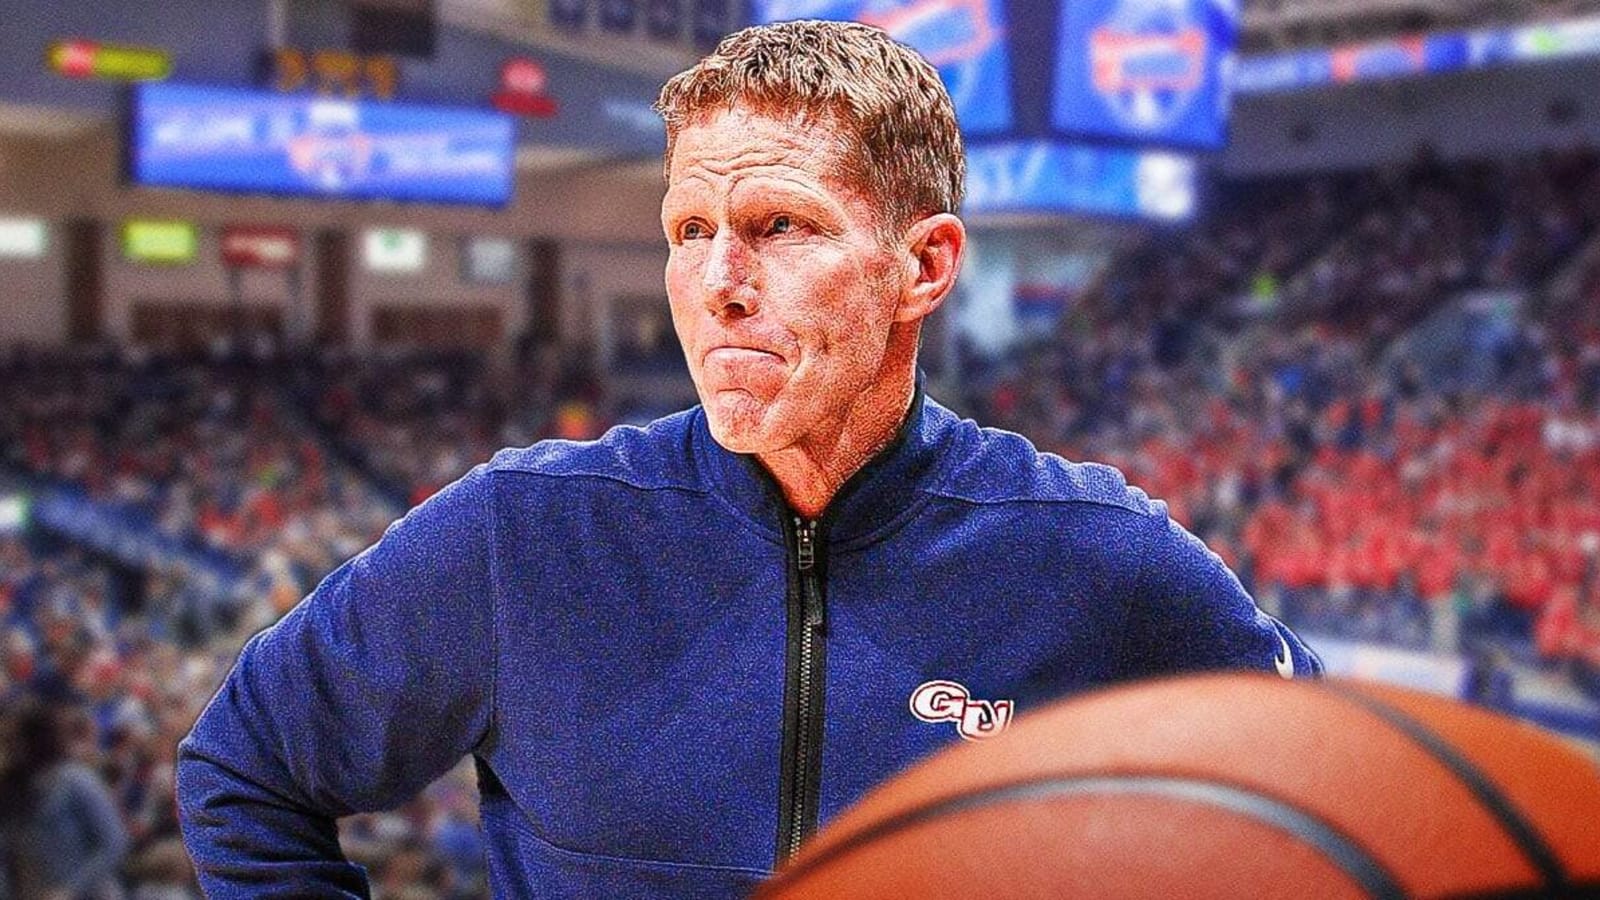 Gonzaga basketball’s Mark Few compares wild game vs St. Mary’s to ‘sumo wrestling’